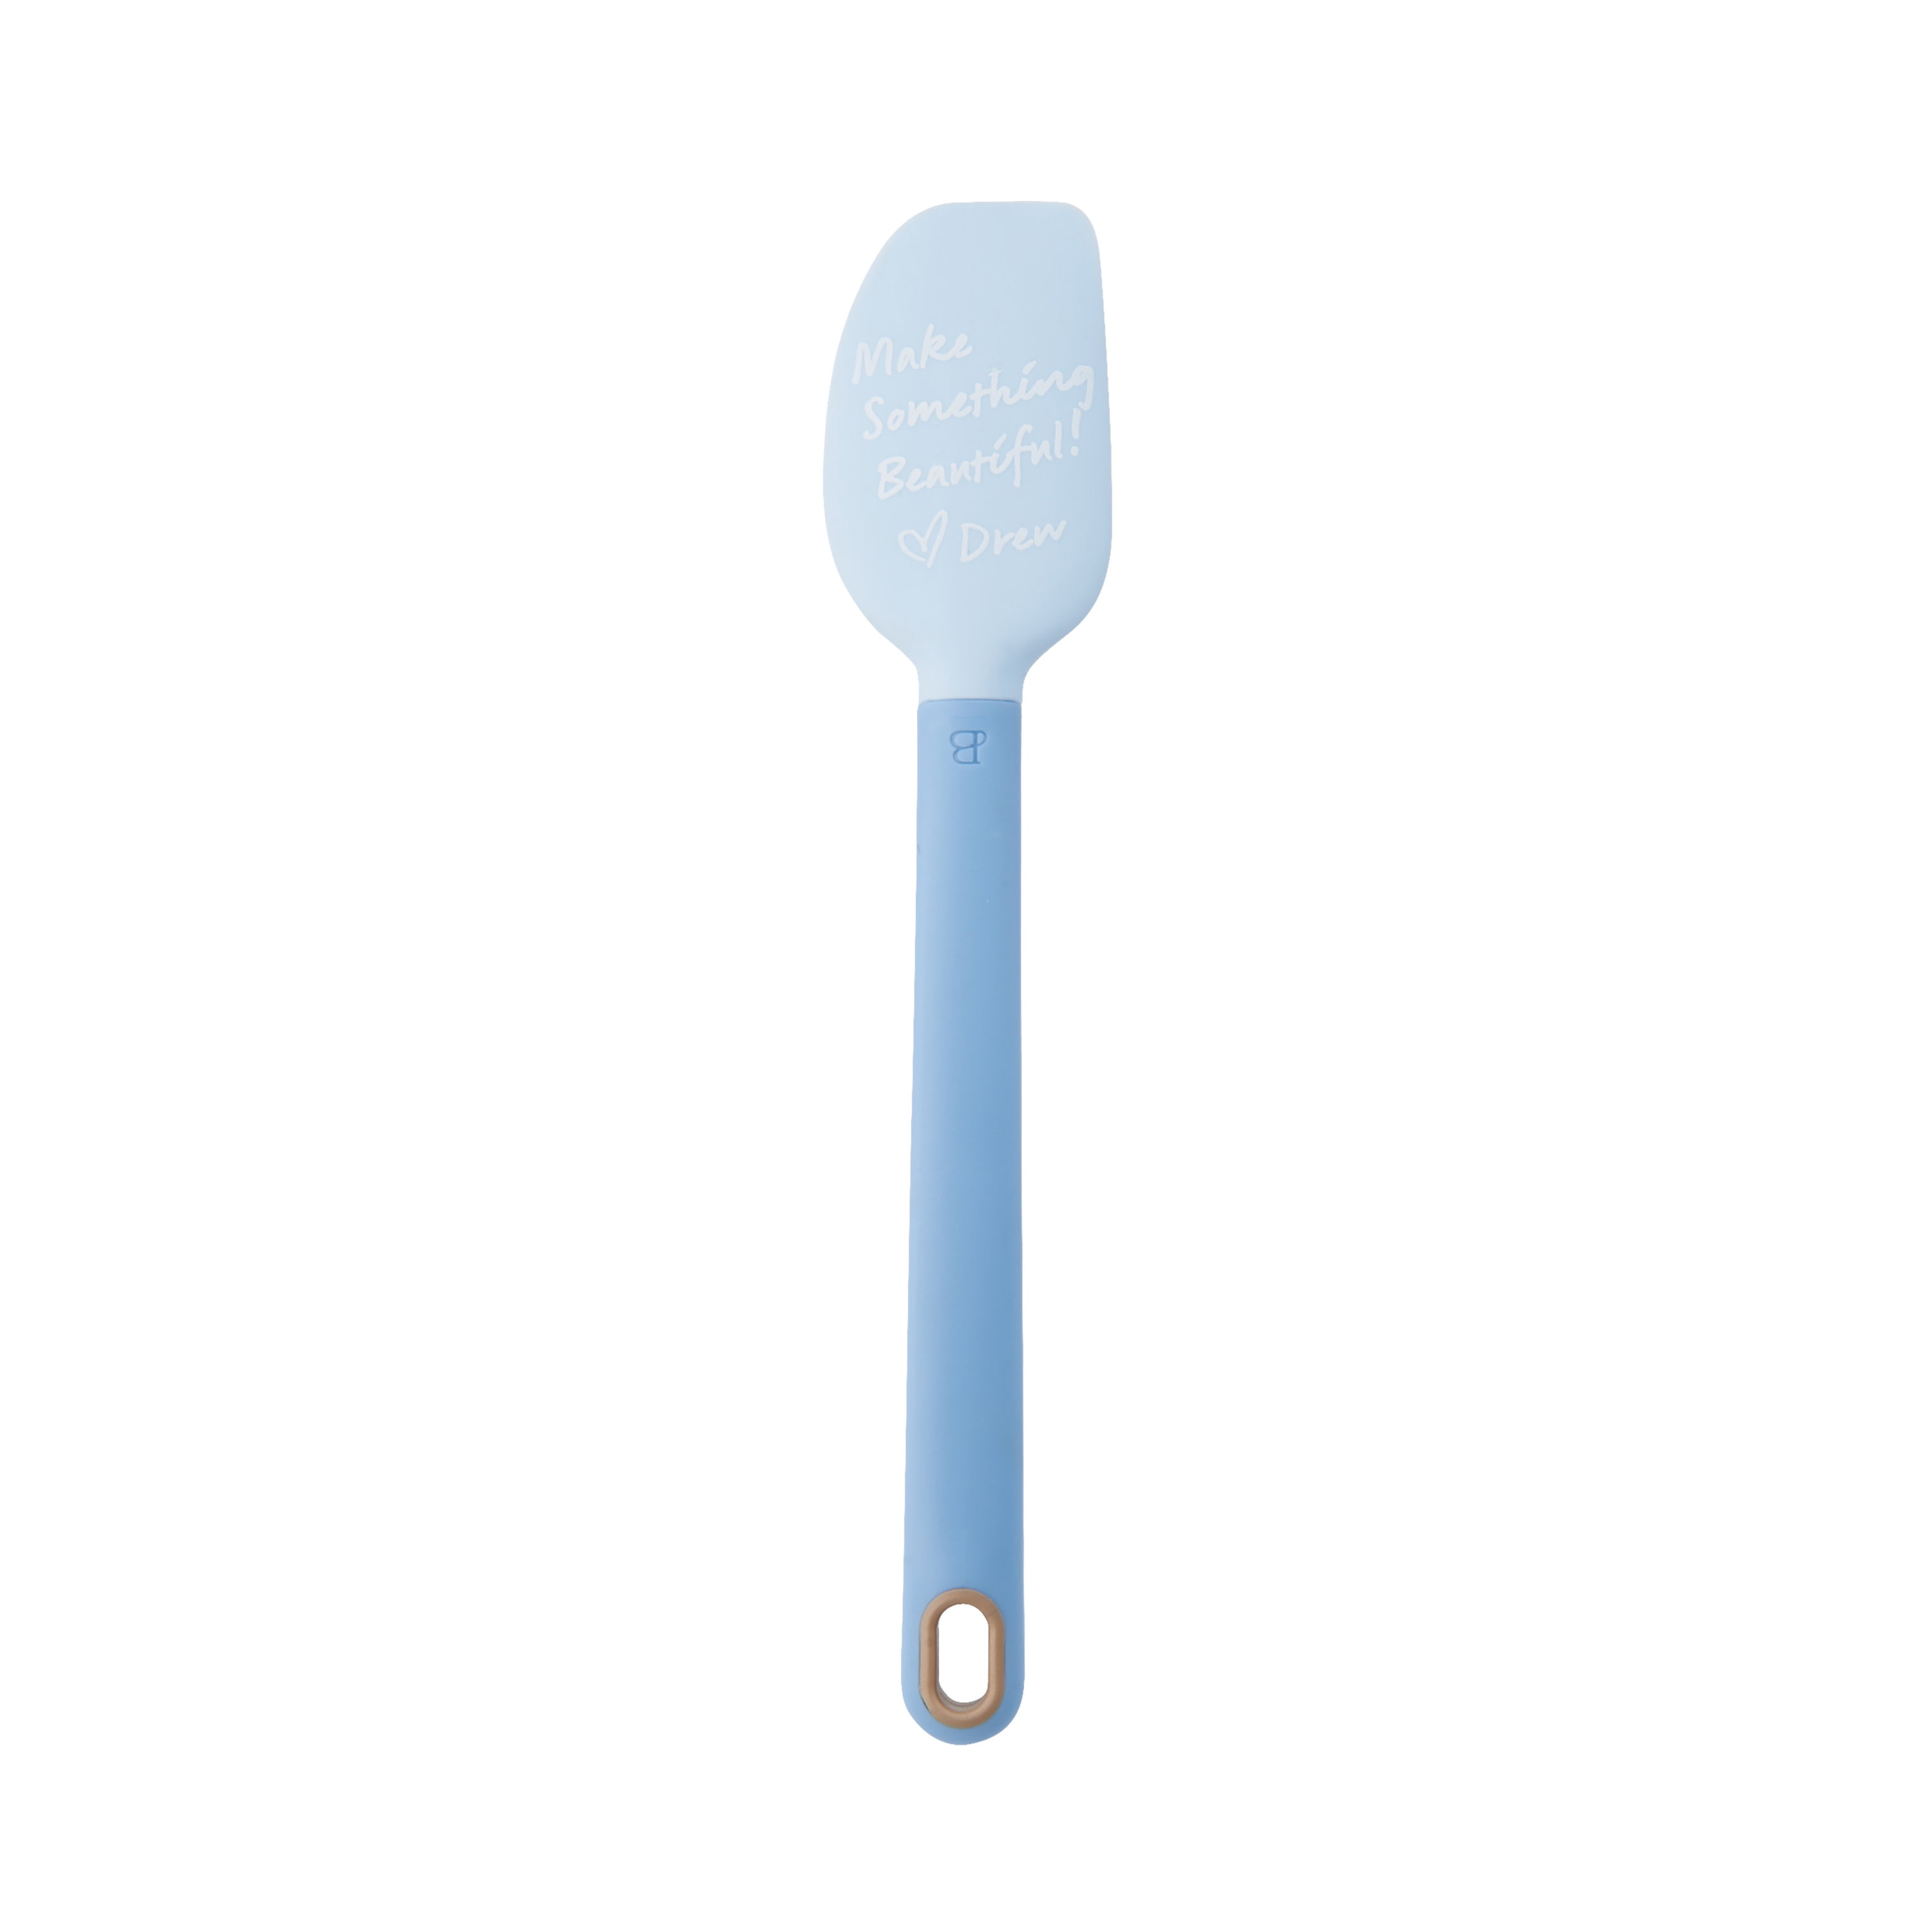 a spatula? : r/CuratedTumblr